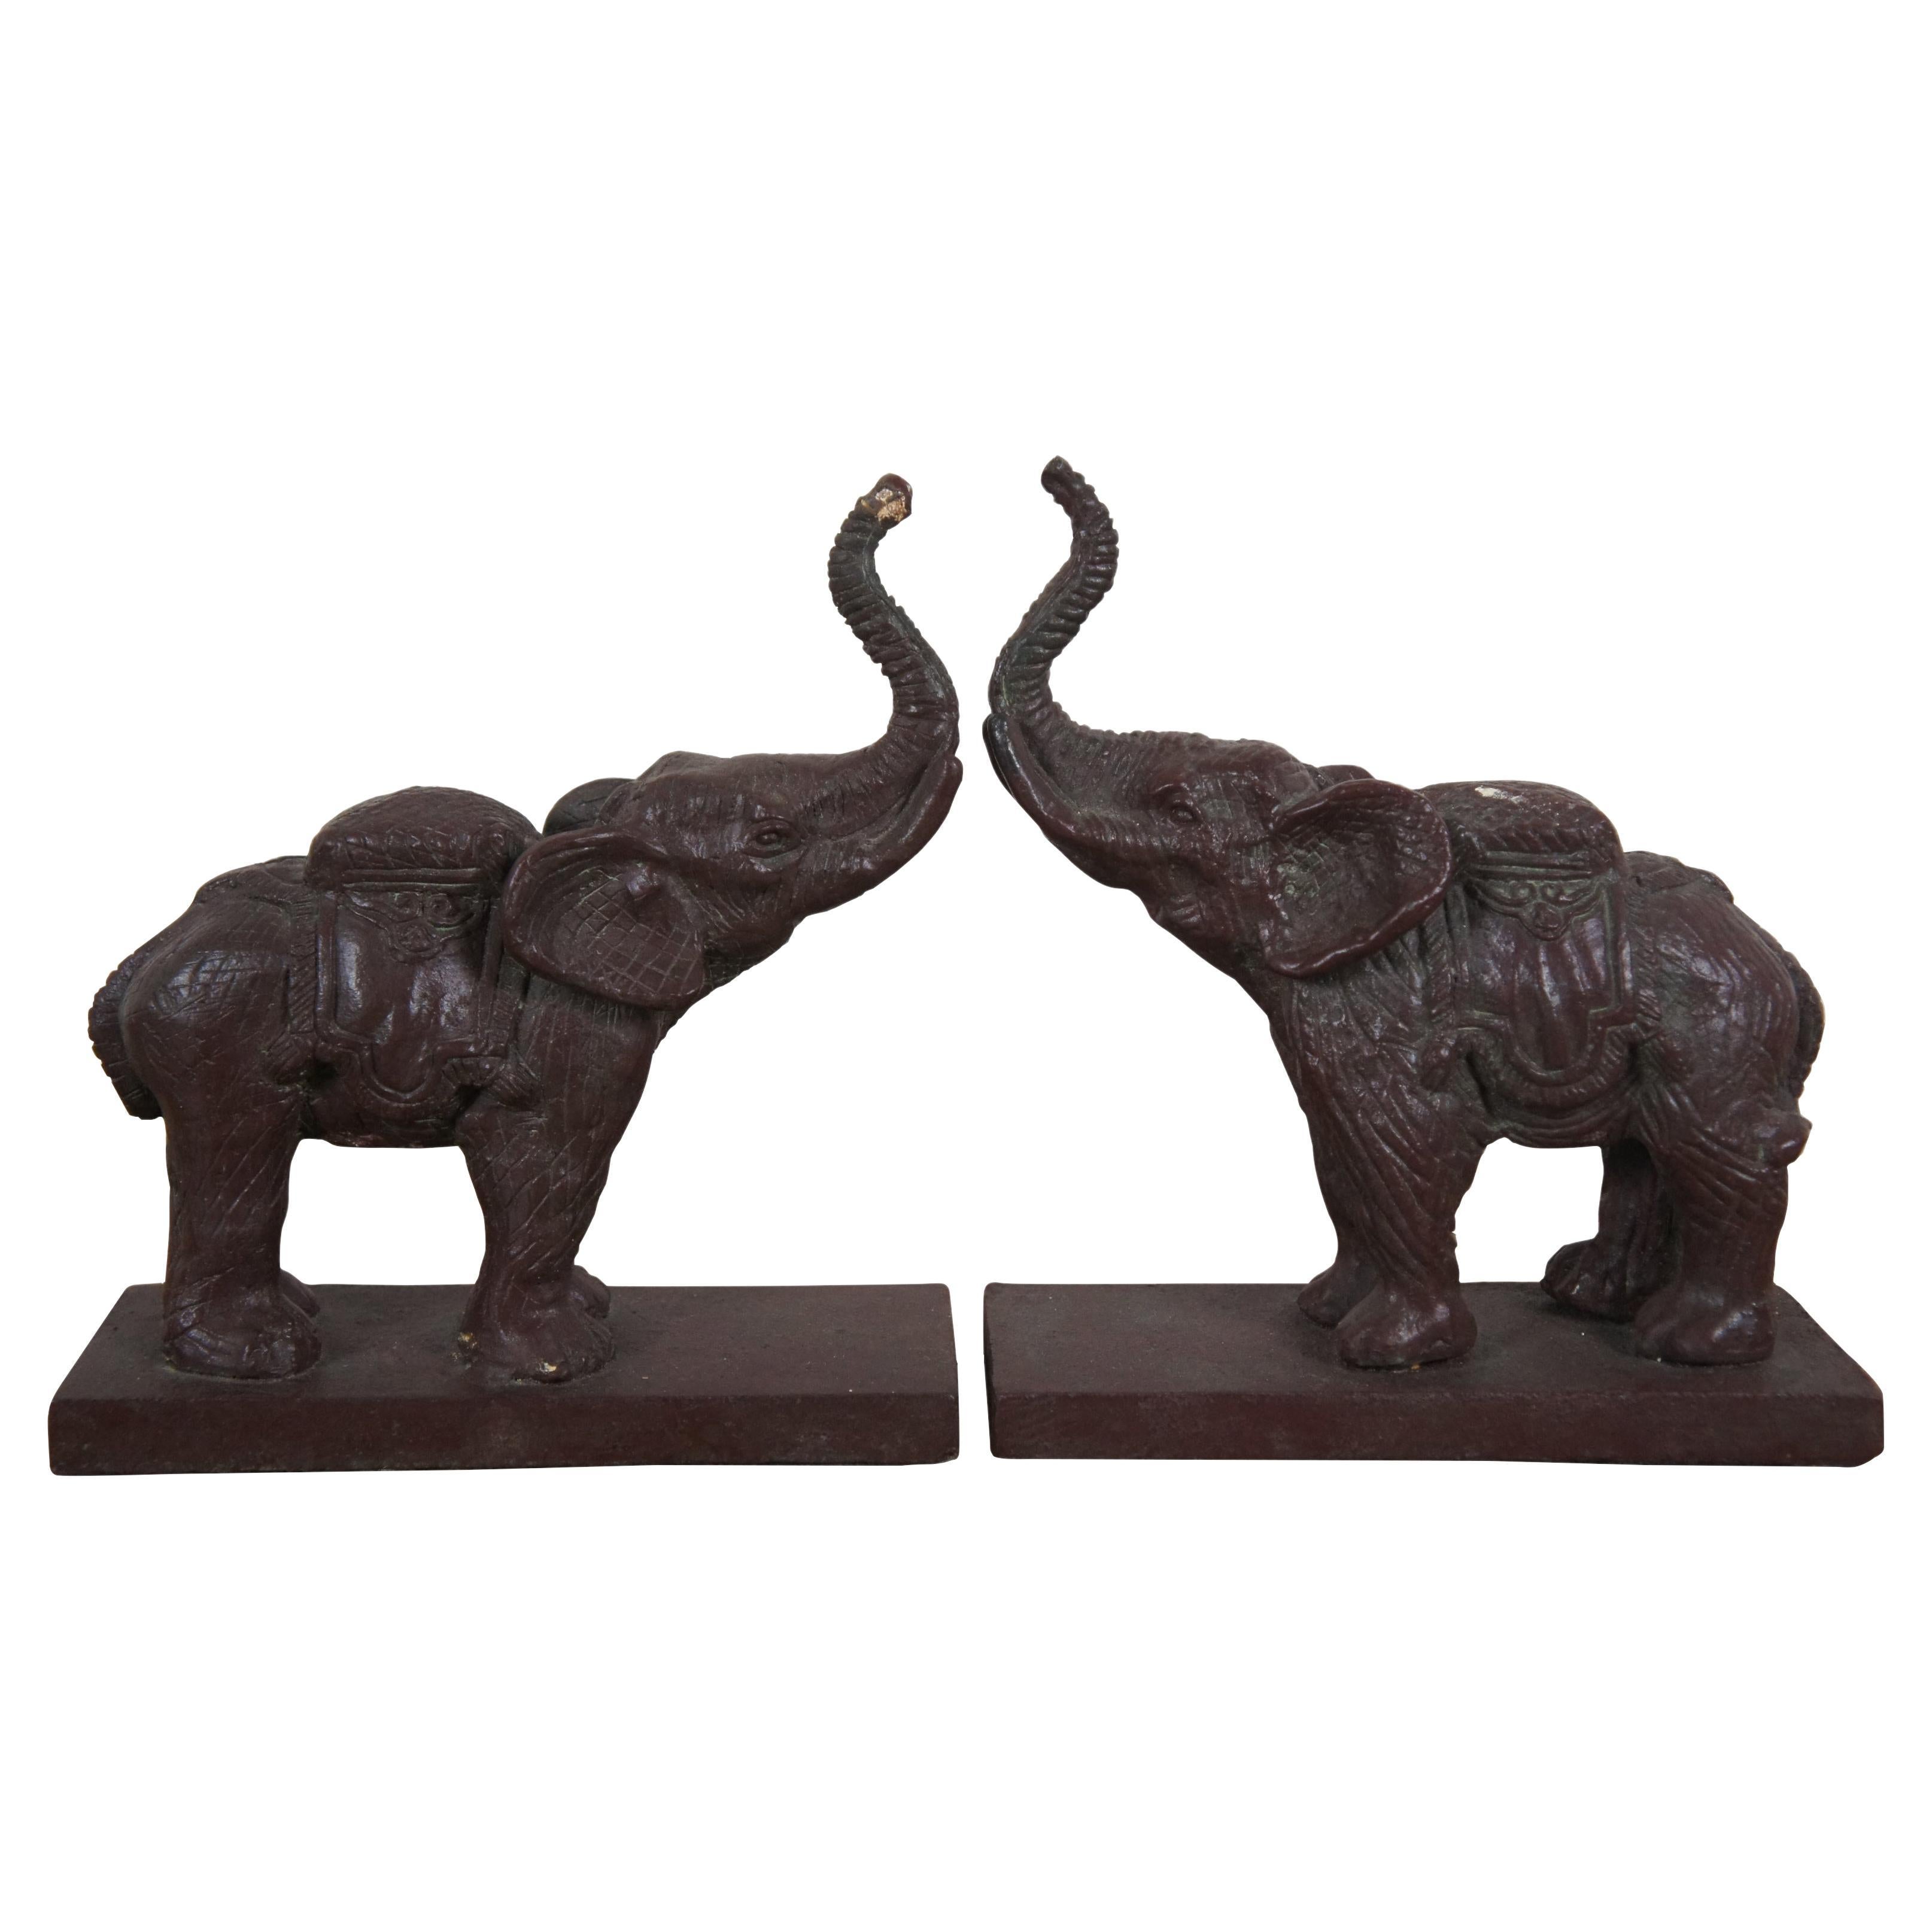 2 Vintage Bronze Lucky Elephant Raised Trunk Bookends Paperweights  7"